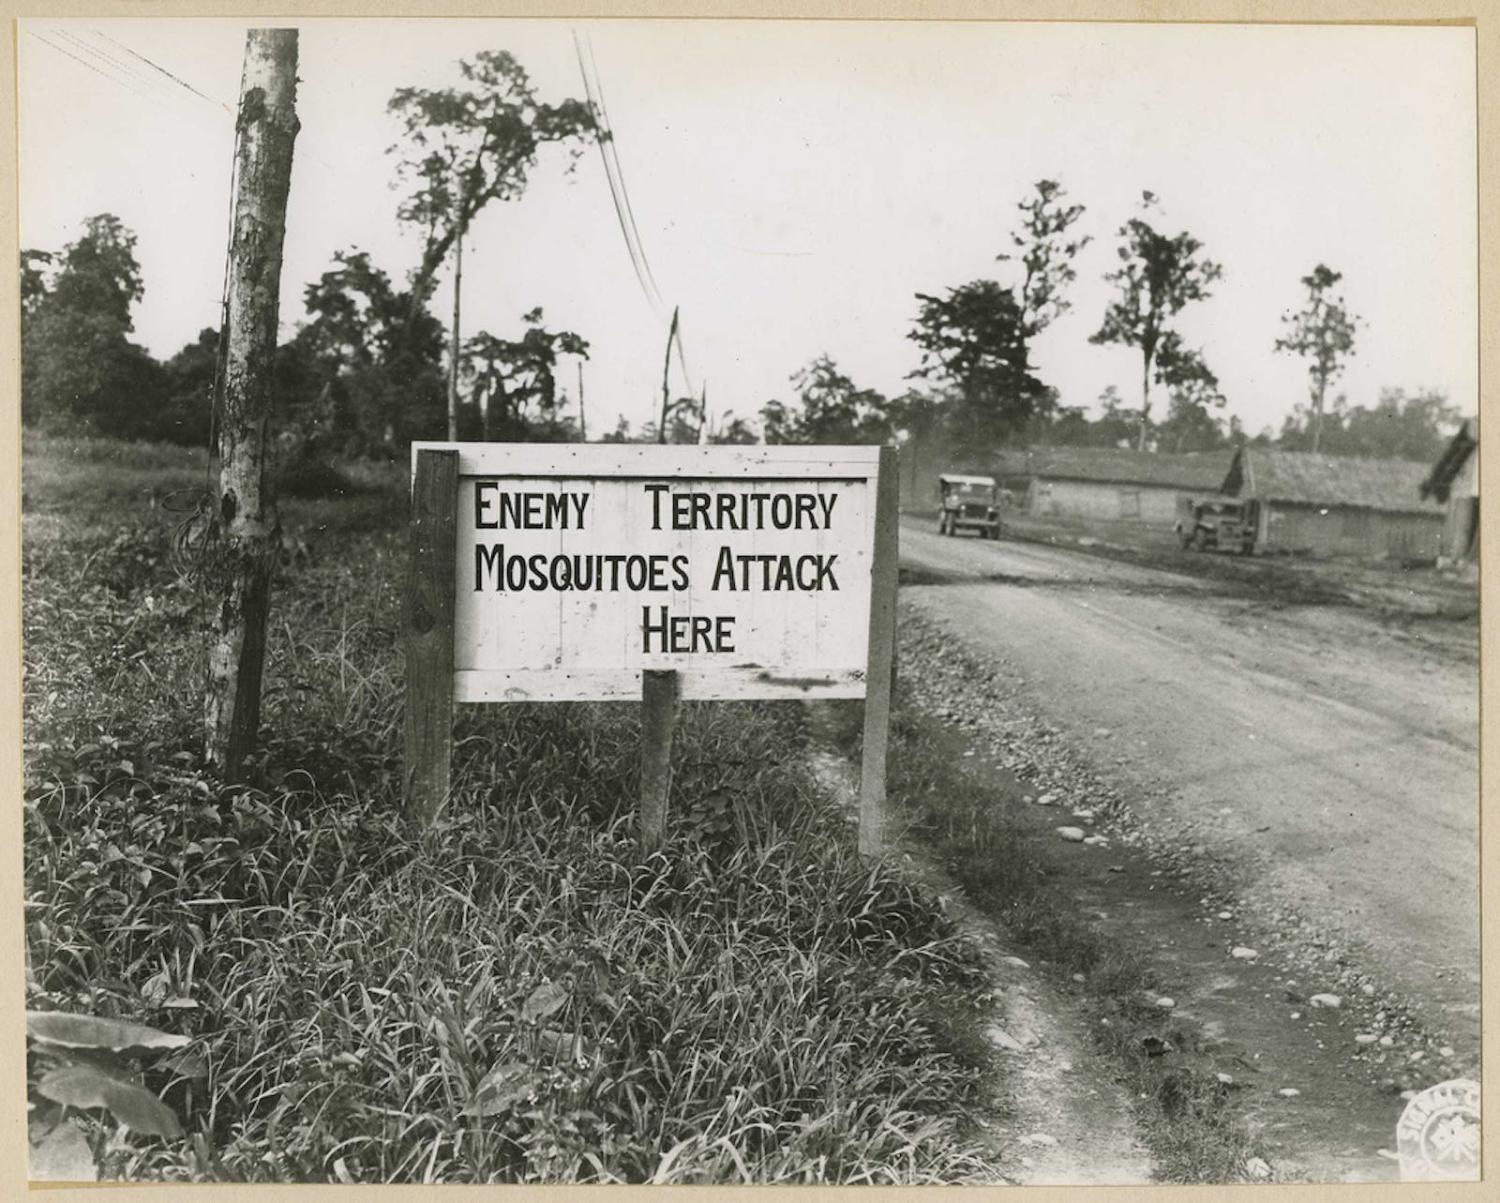 Malaria control efforts during the Second World War (Photo: National Museum of Health and Medicine/Flickr)